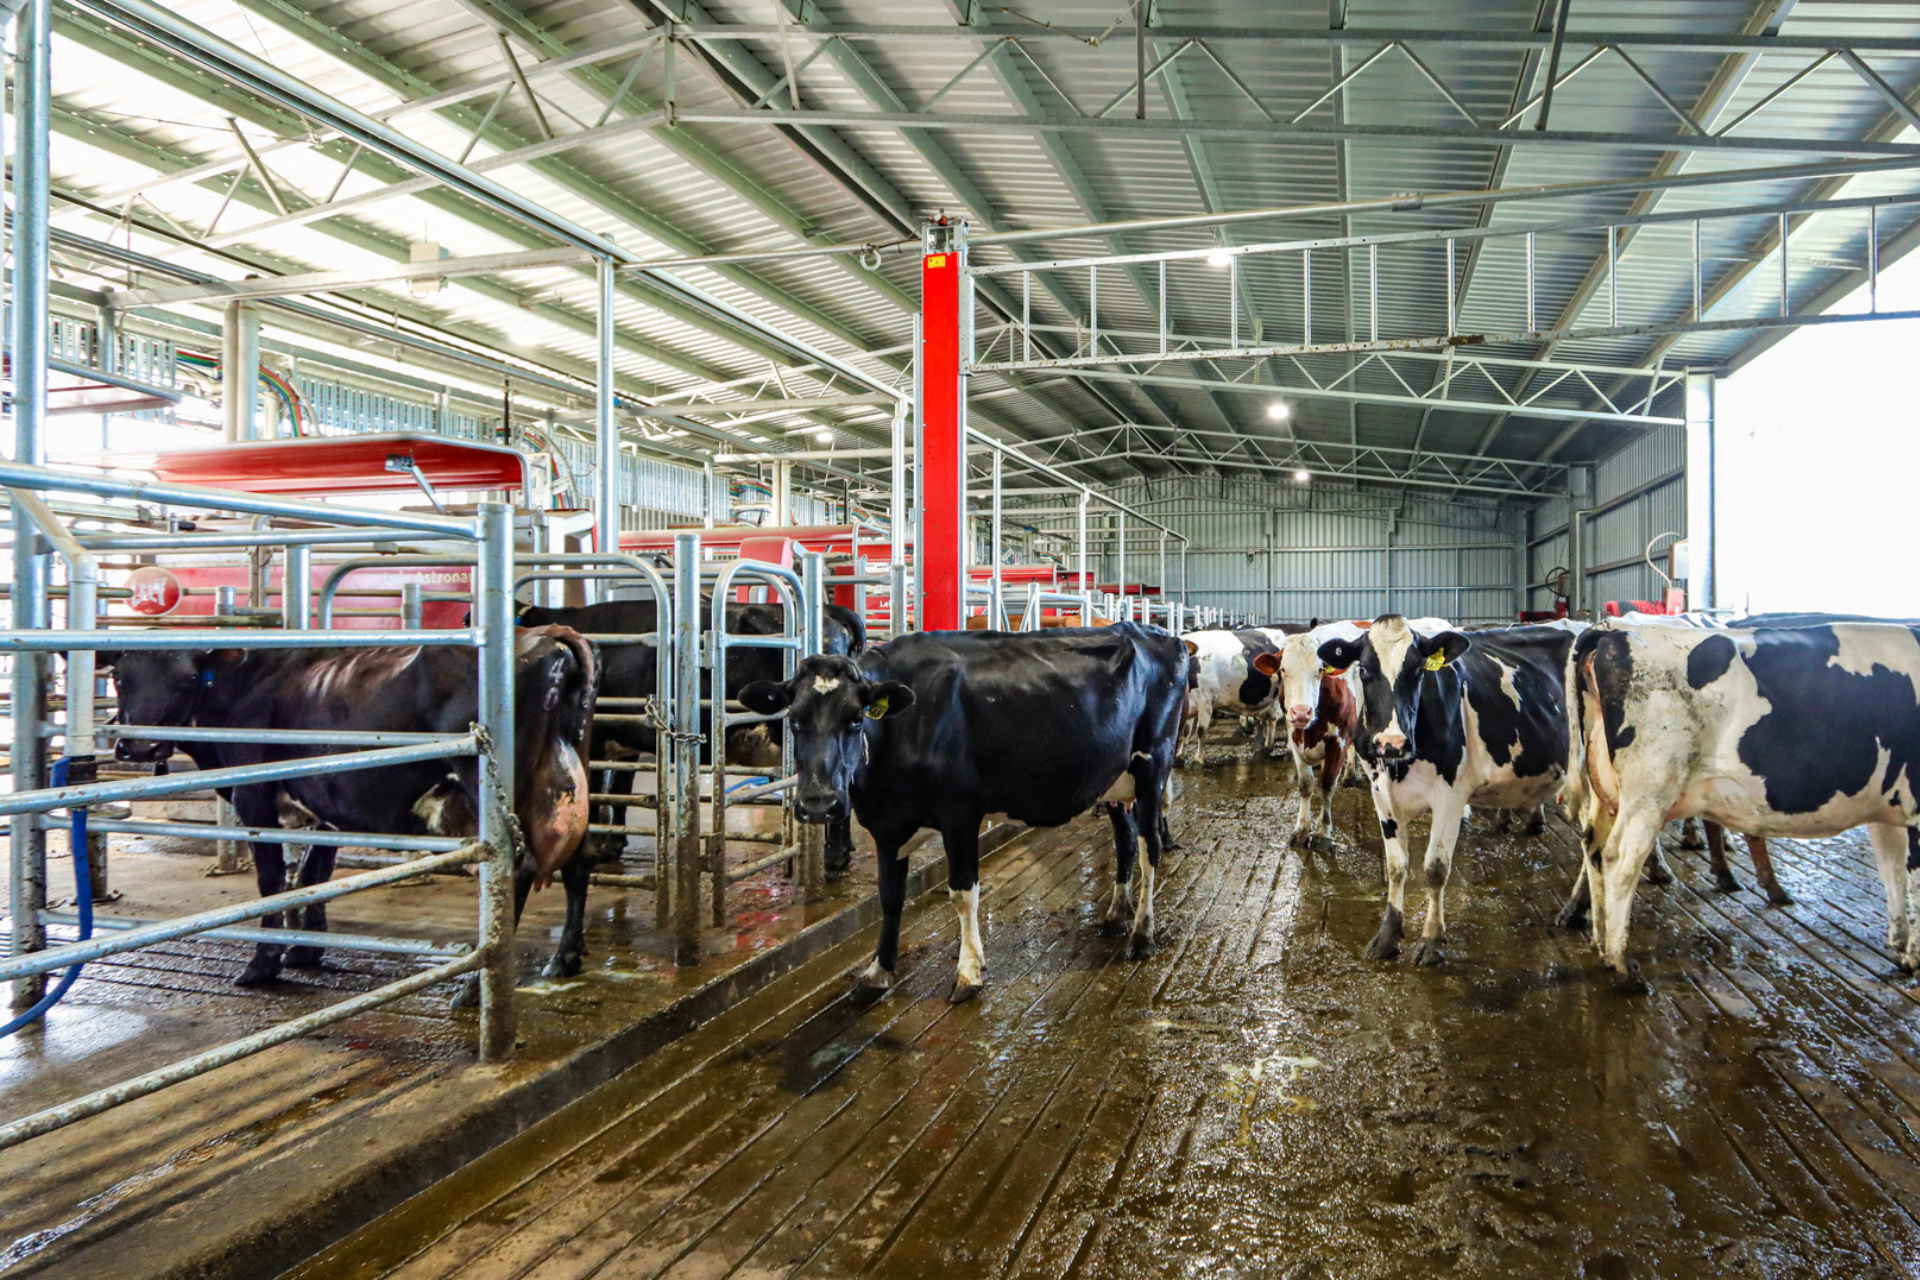 You are currently viewing 30m x 15m x 4.5m robotic dairy shed